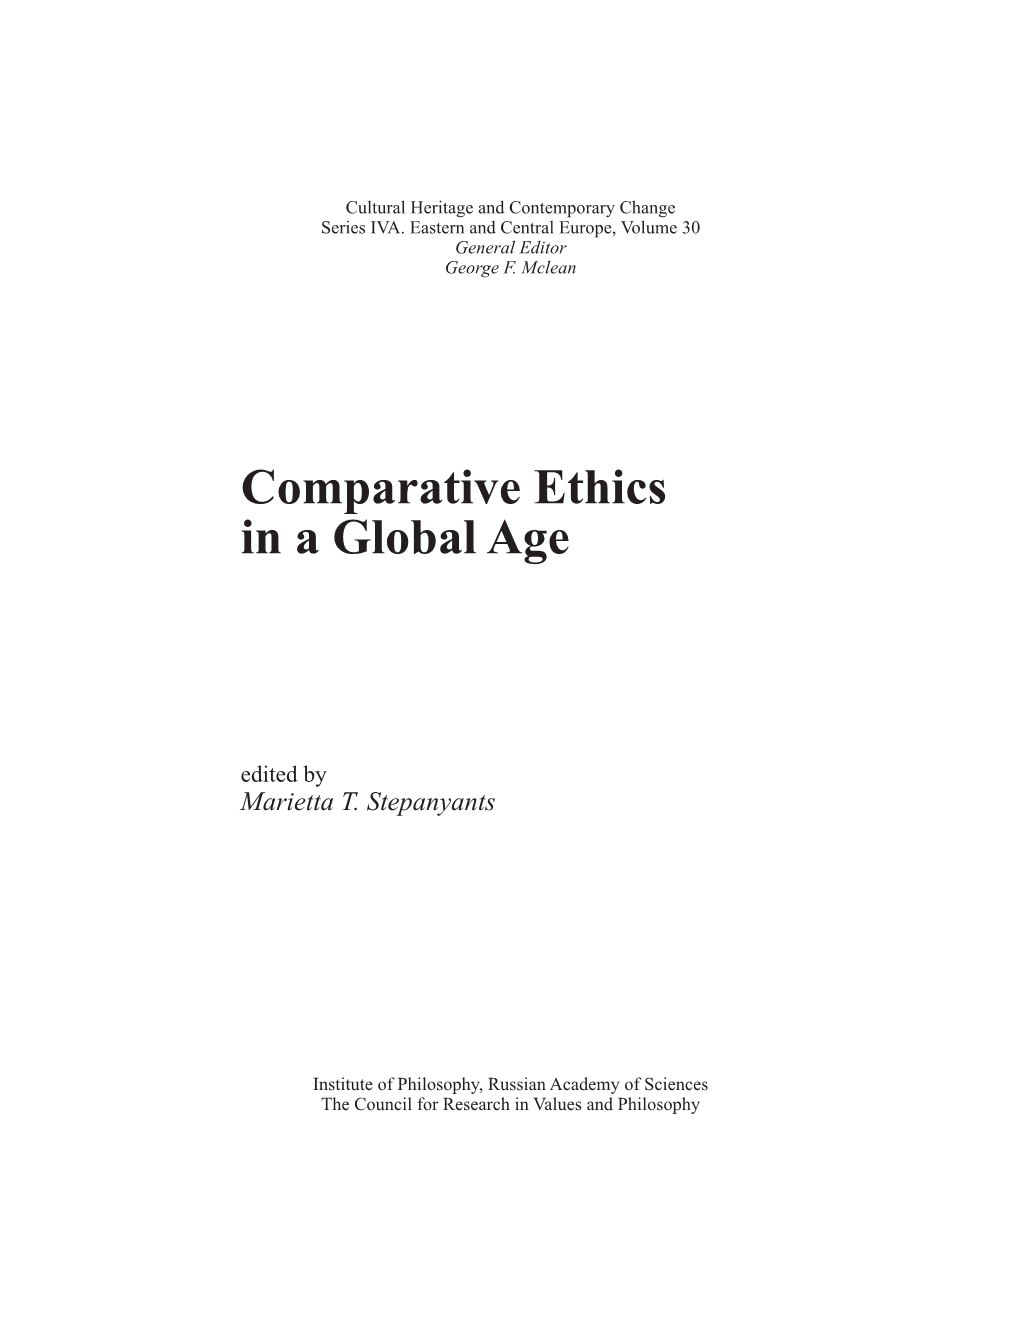 Comparative Ethics in a Global Age